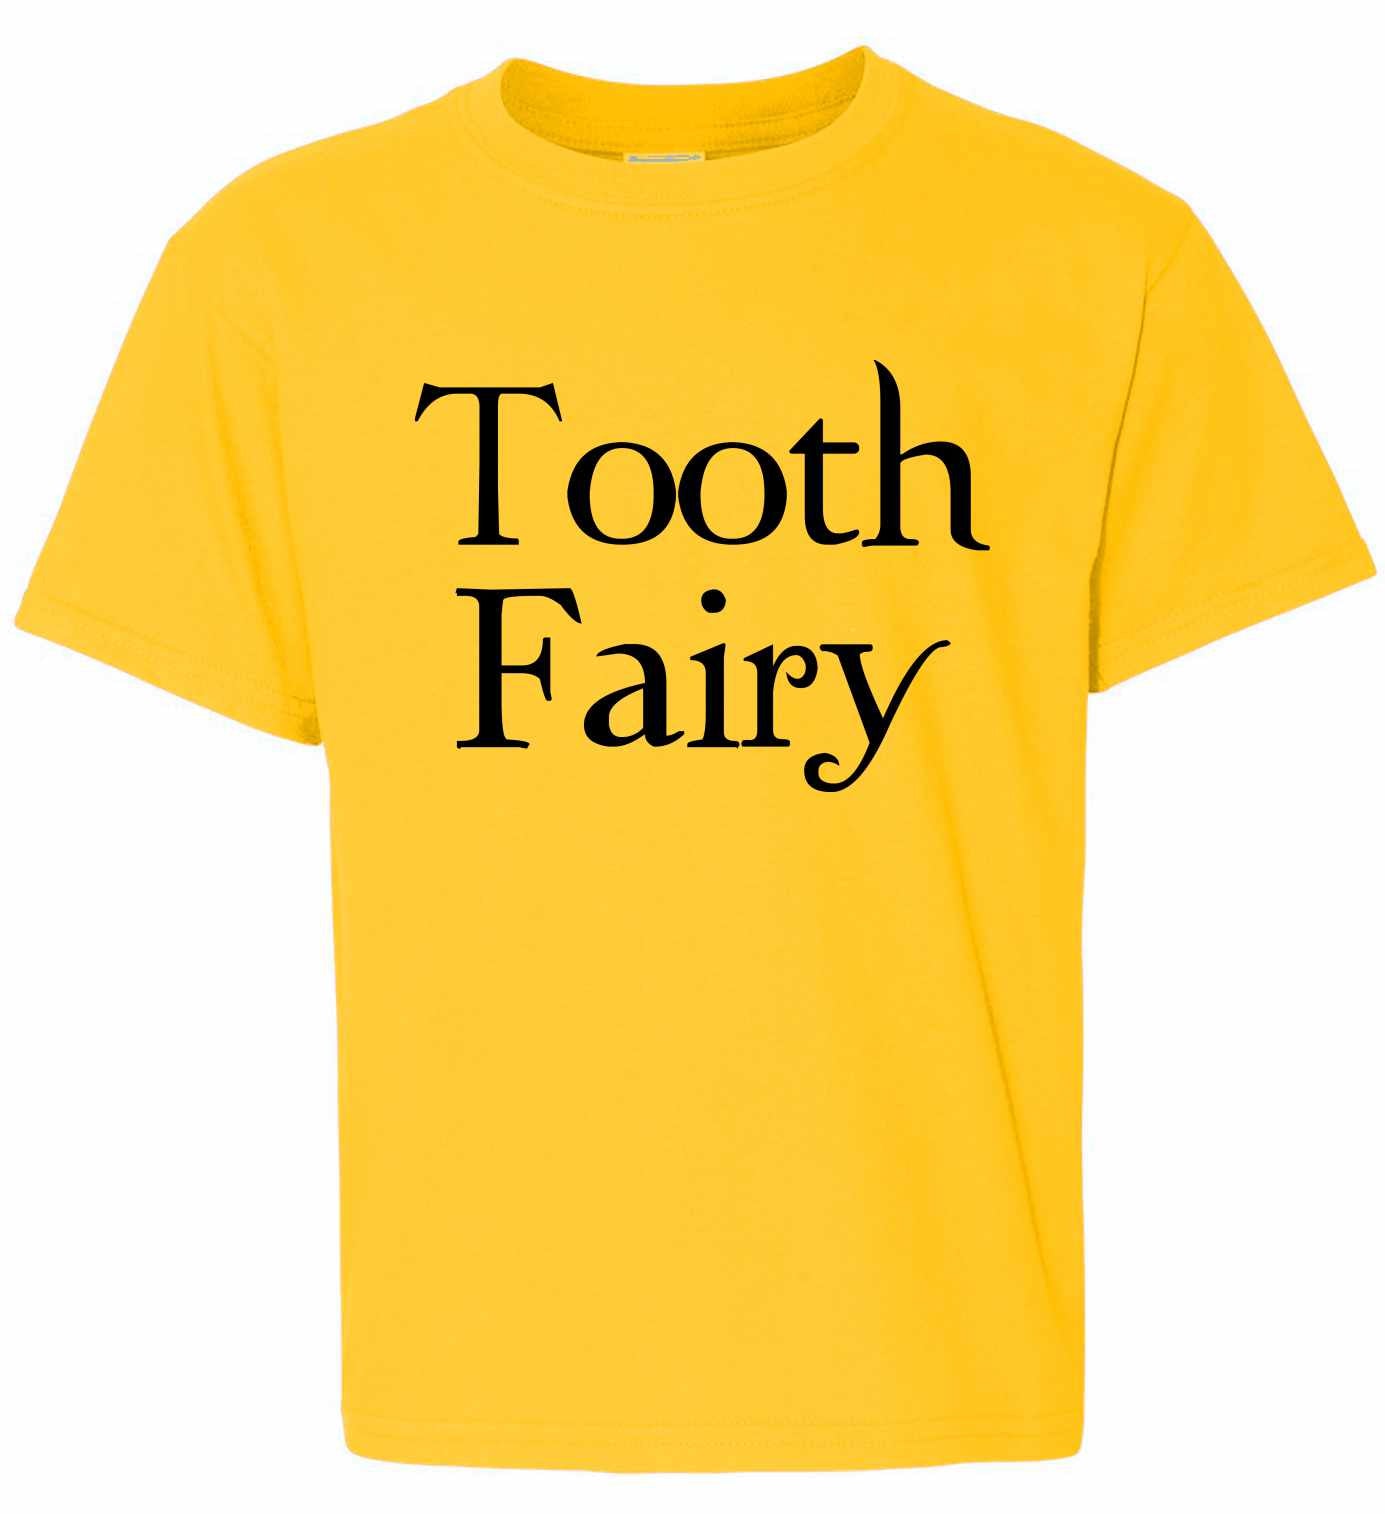 Tooth Fairy on Kids T-Shirt (#680-201)